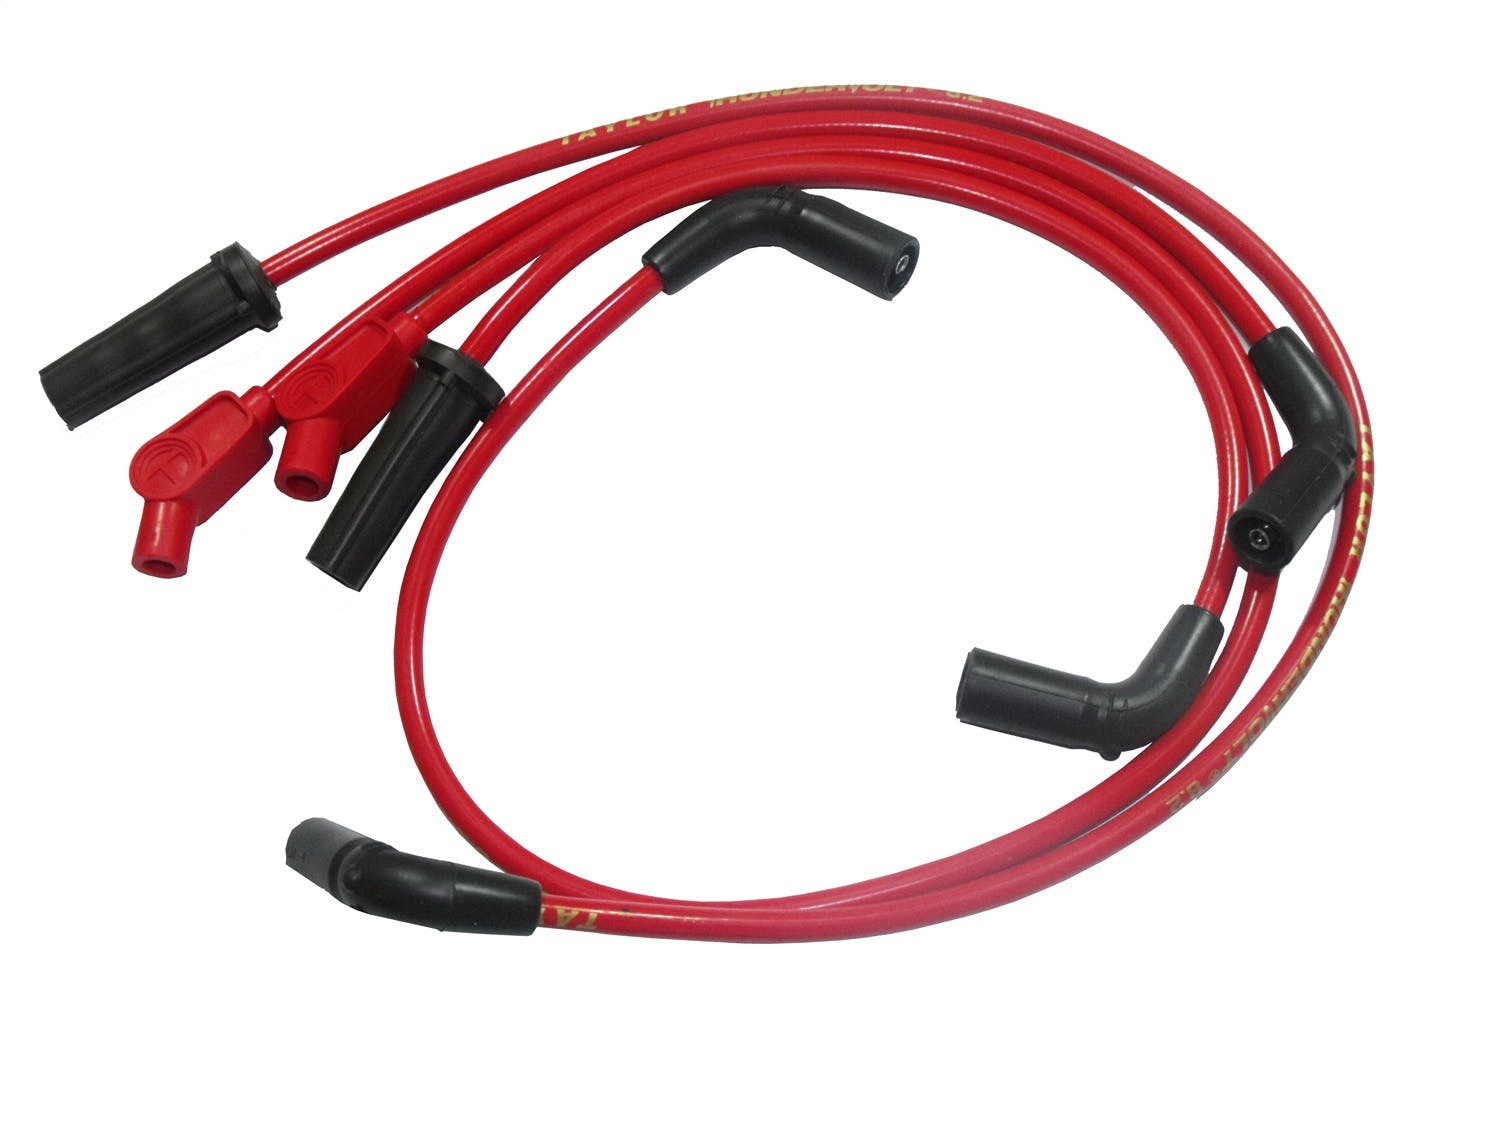 Taylor Cable Products 10237 8mm Spiro-Pro red custom MC 135